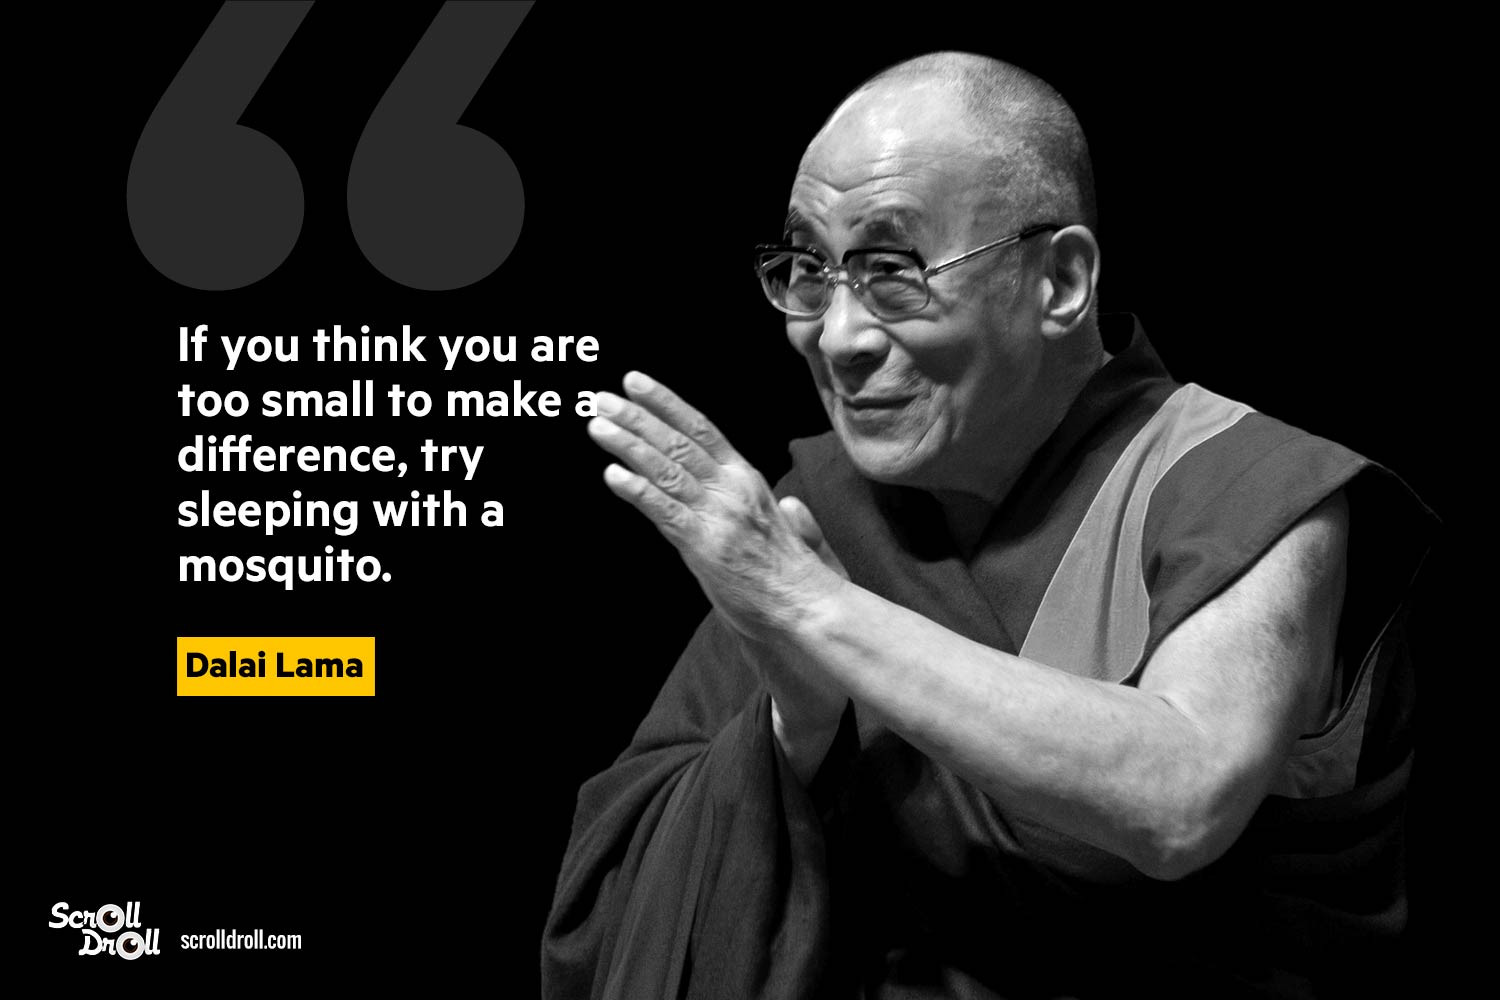 dalai lama quote kindness is my religion